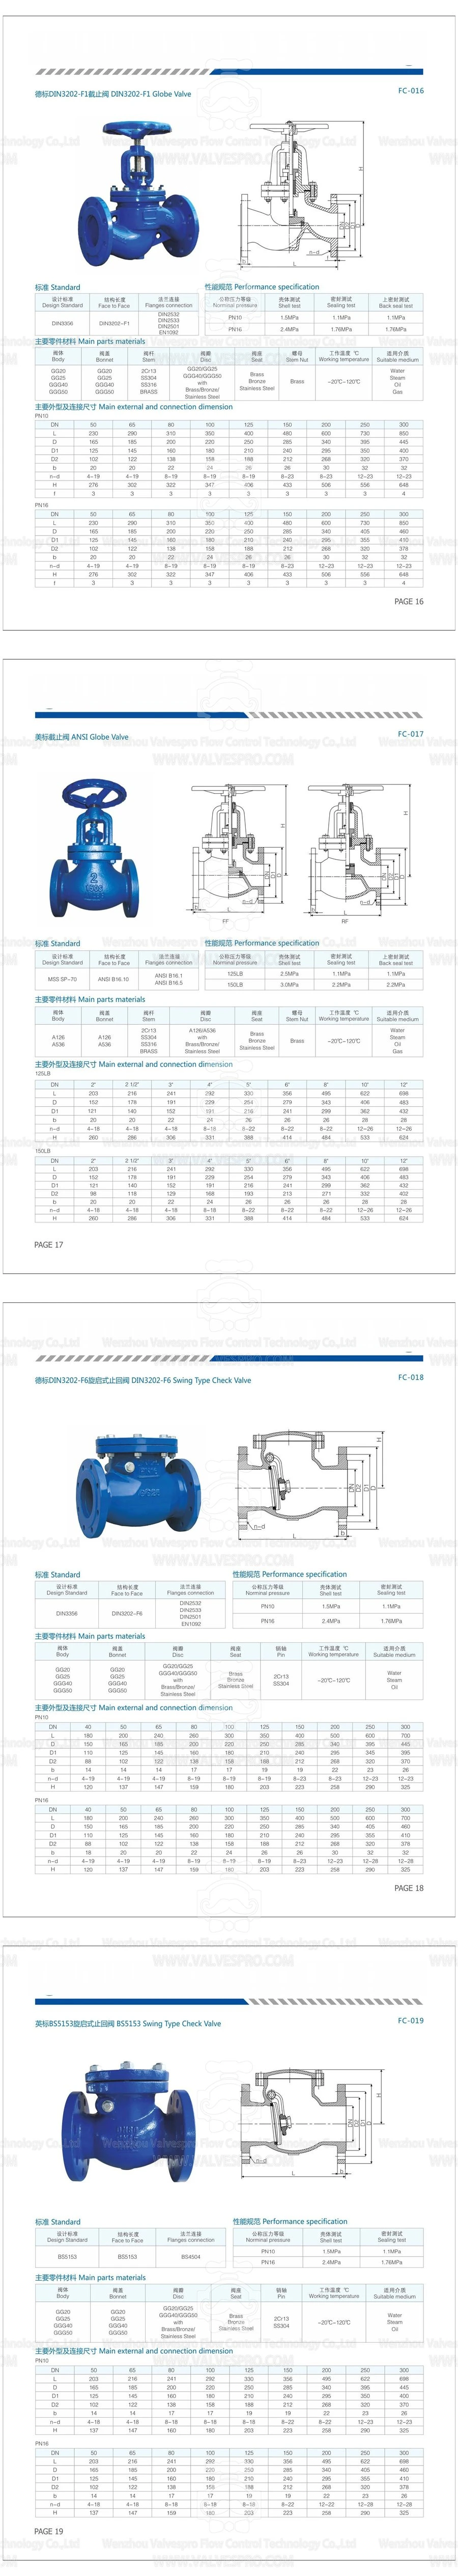 DIN3352-F6 Ductile Iron Cast Iron Flanged Swing Check Valve